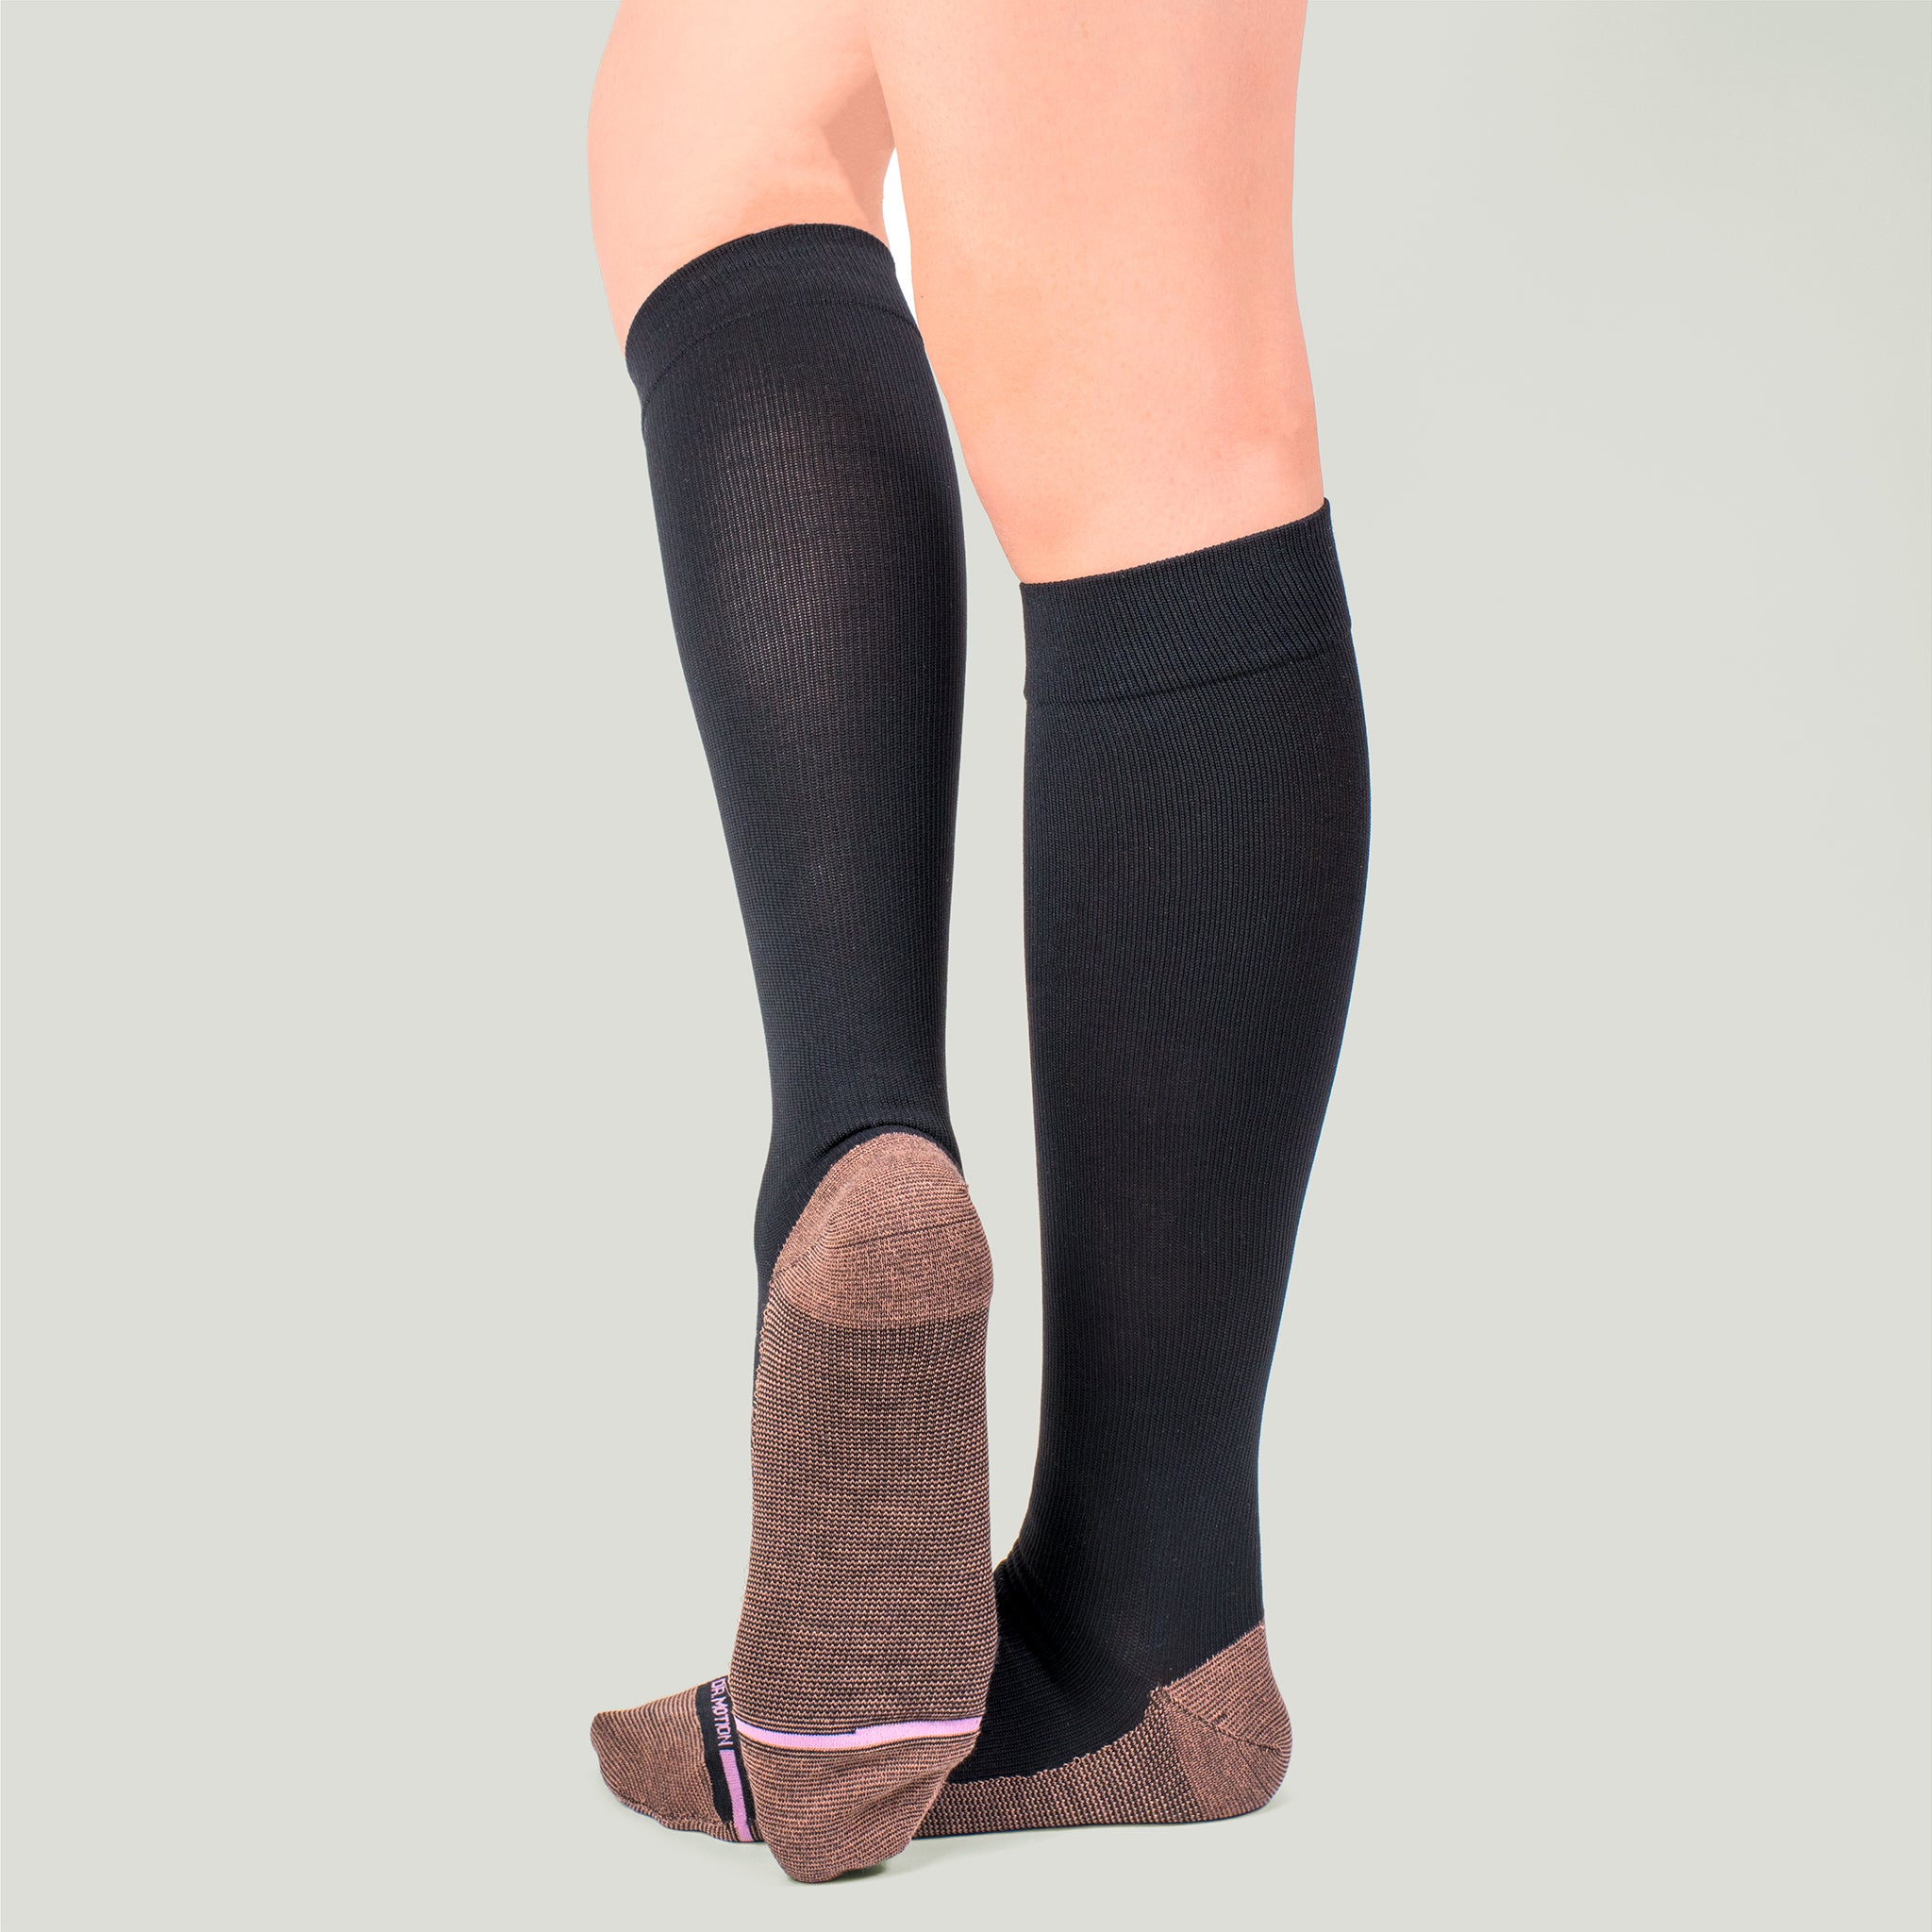  Travelon Lg. Copper Infused Compress Socks, Black, One Size :  Clothing, Shoes & Jewelry